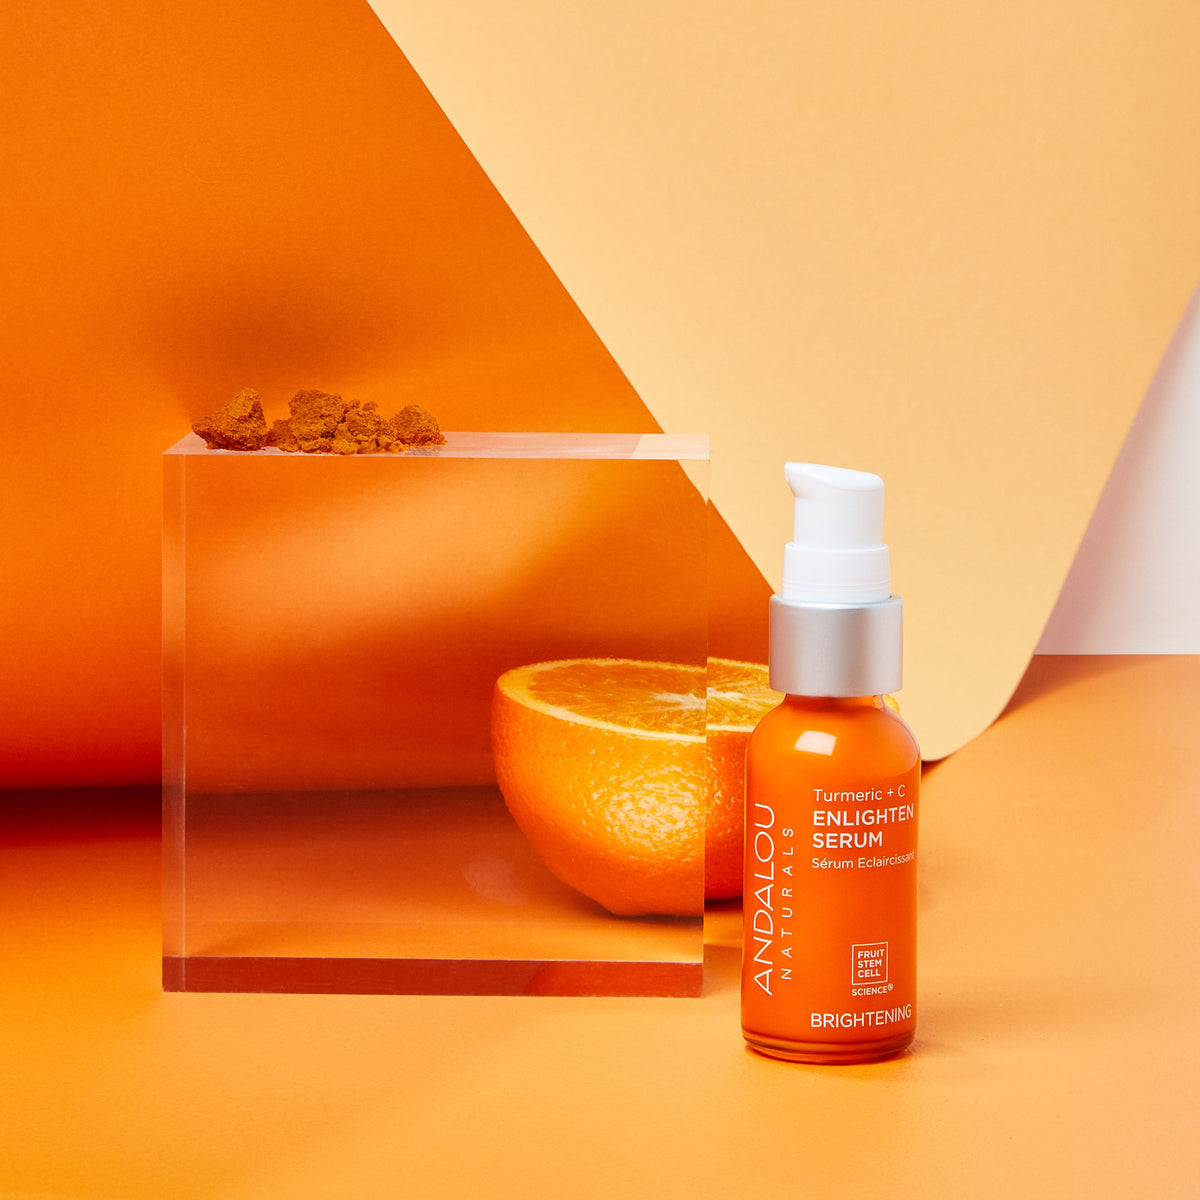 Brightening Turmeric + Vitamin C Enlighten Serum from Andalou Naturals with turmeric powder, an orange, and a glass cube on an orange background.